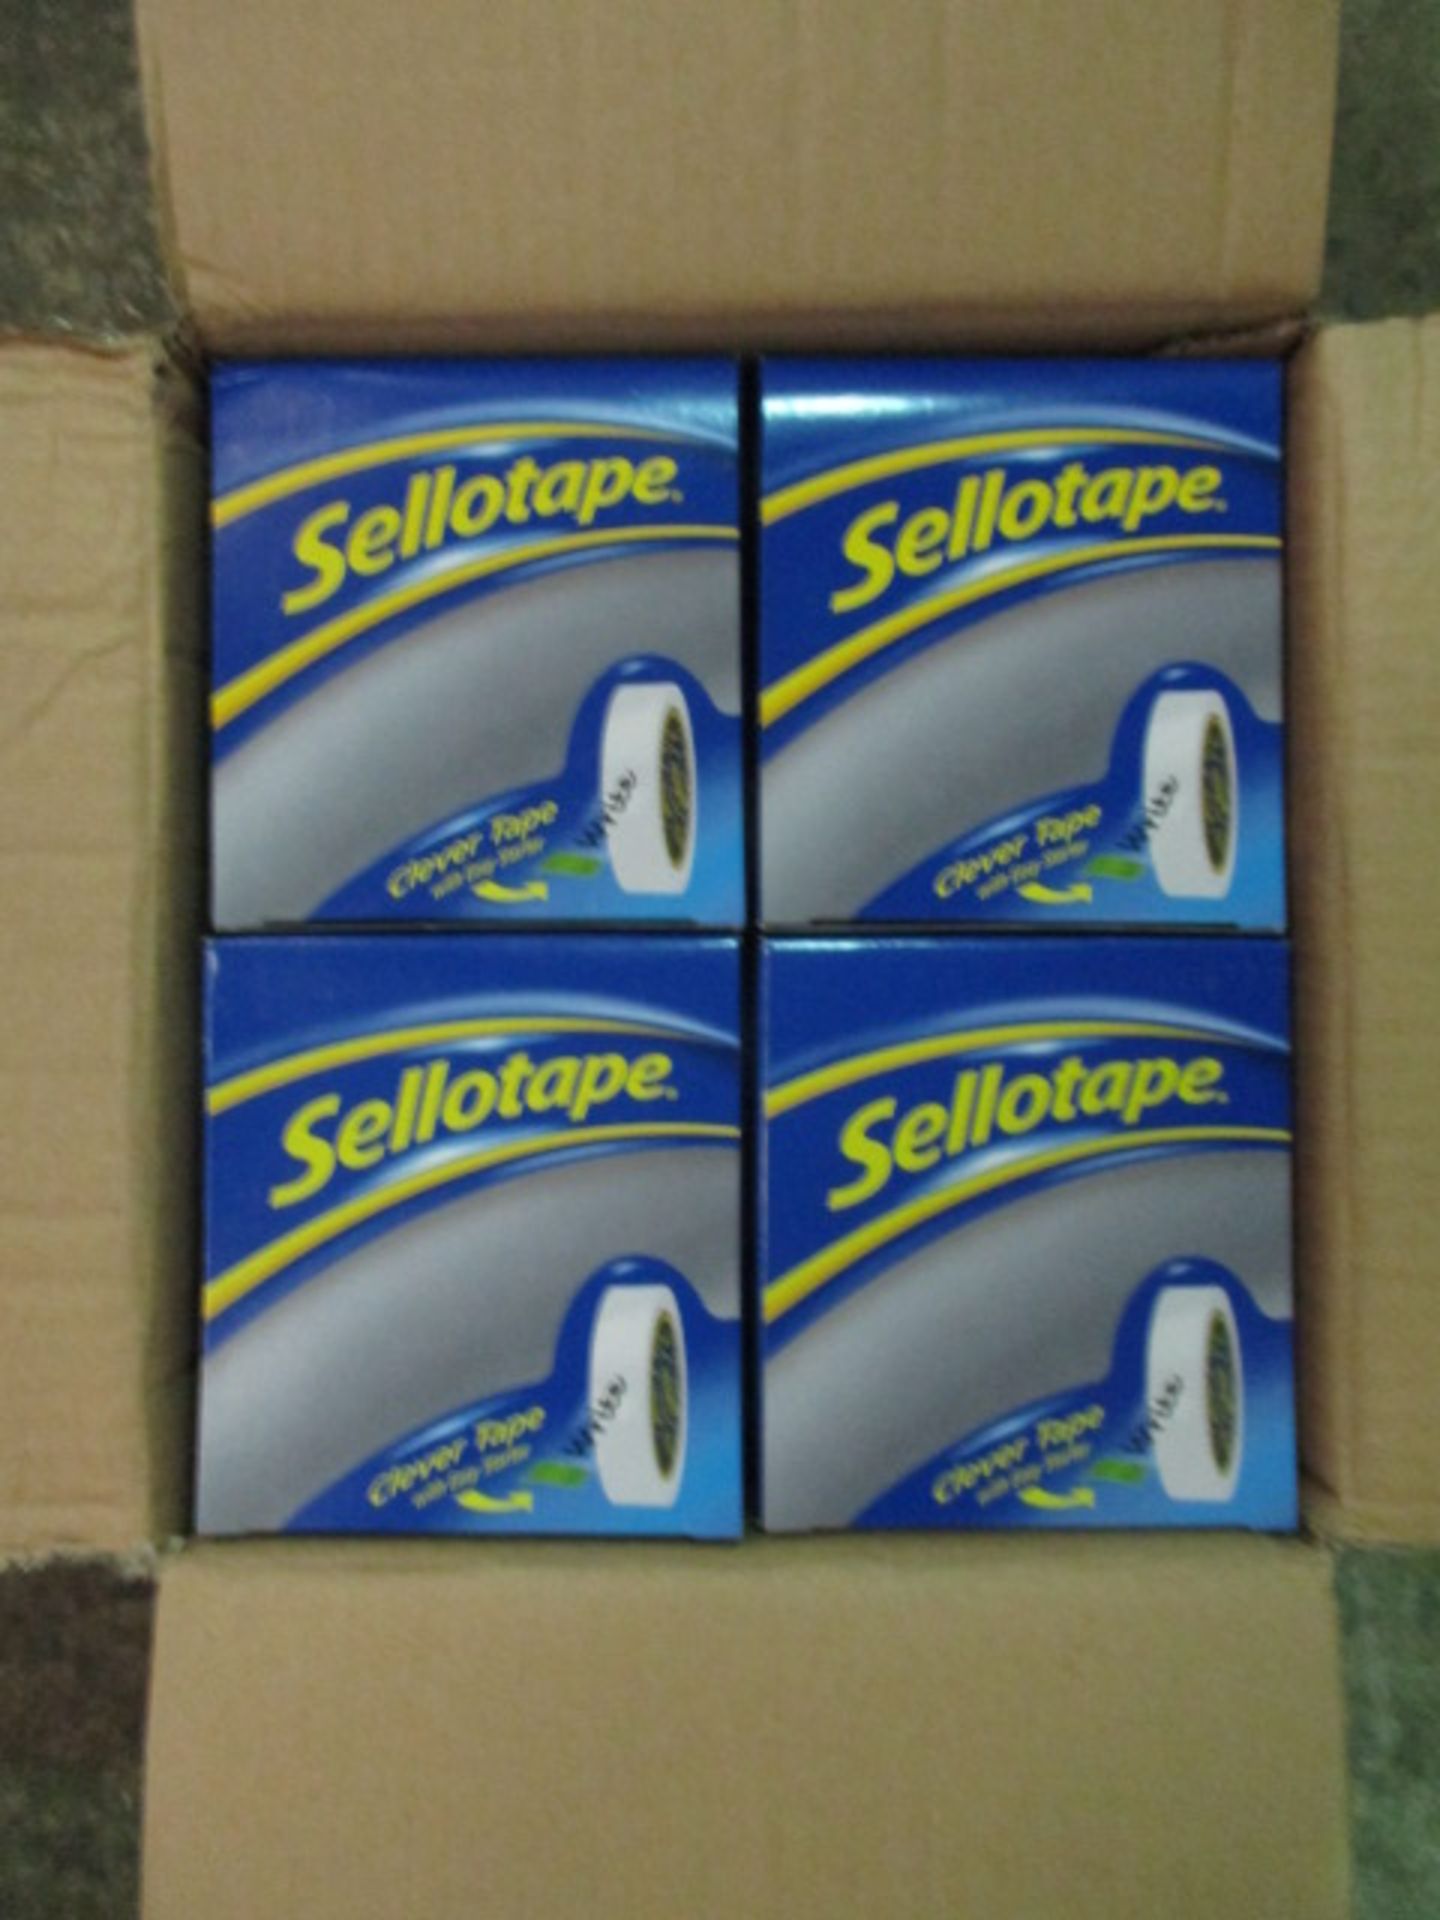 4 x Boxes of Sellotape 'Clever Tape' - 6 Rolls Per Box, 24 in Total - RRP £3.99 Per Roll